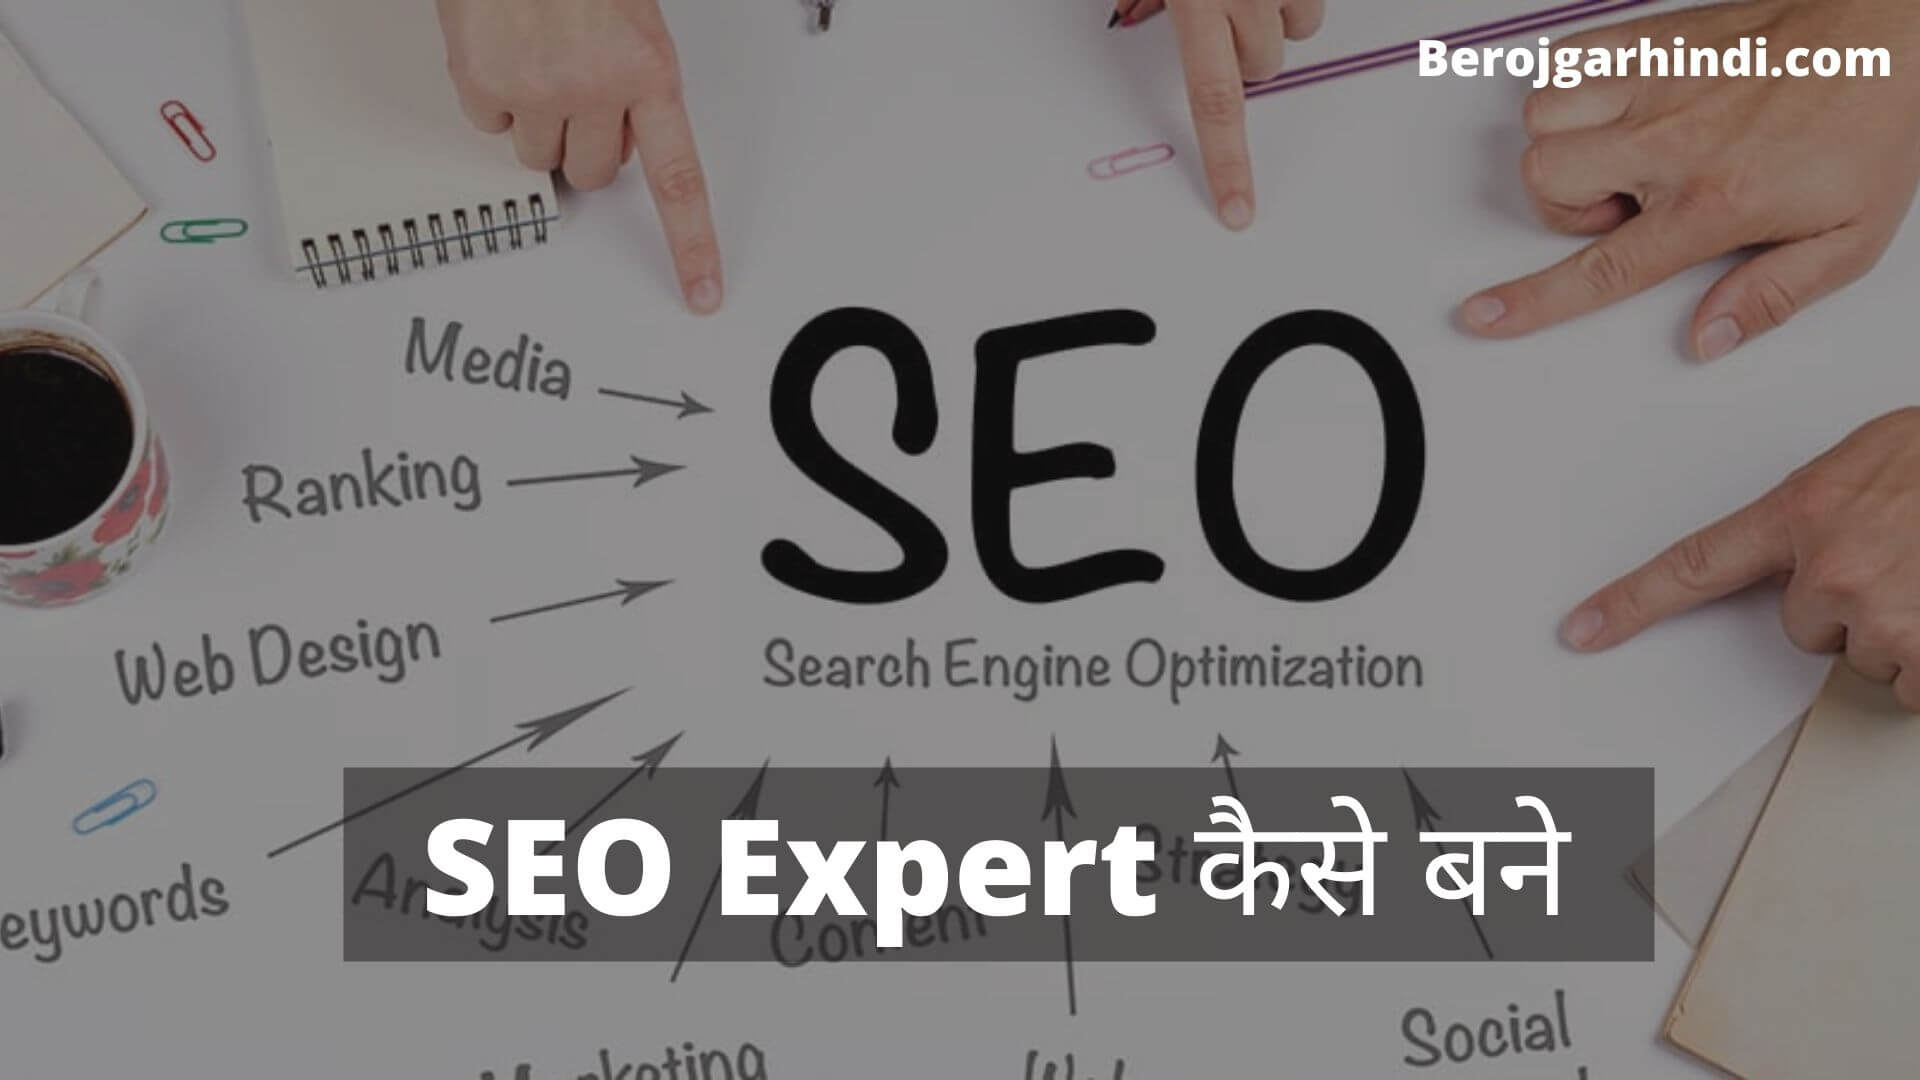 SEO Expert कैसे बने | How To Become SEO Expert in Hindi 2022